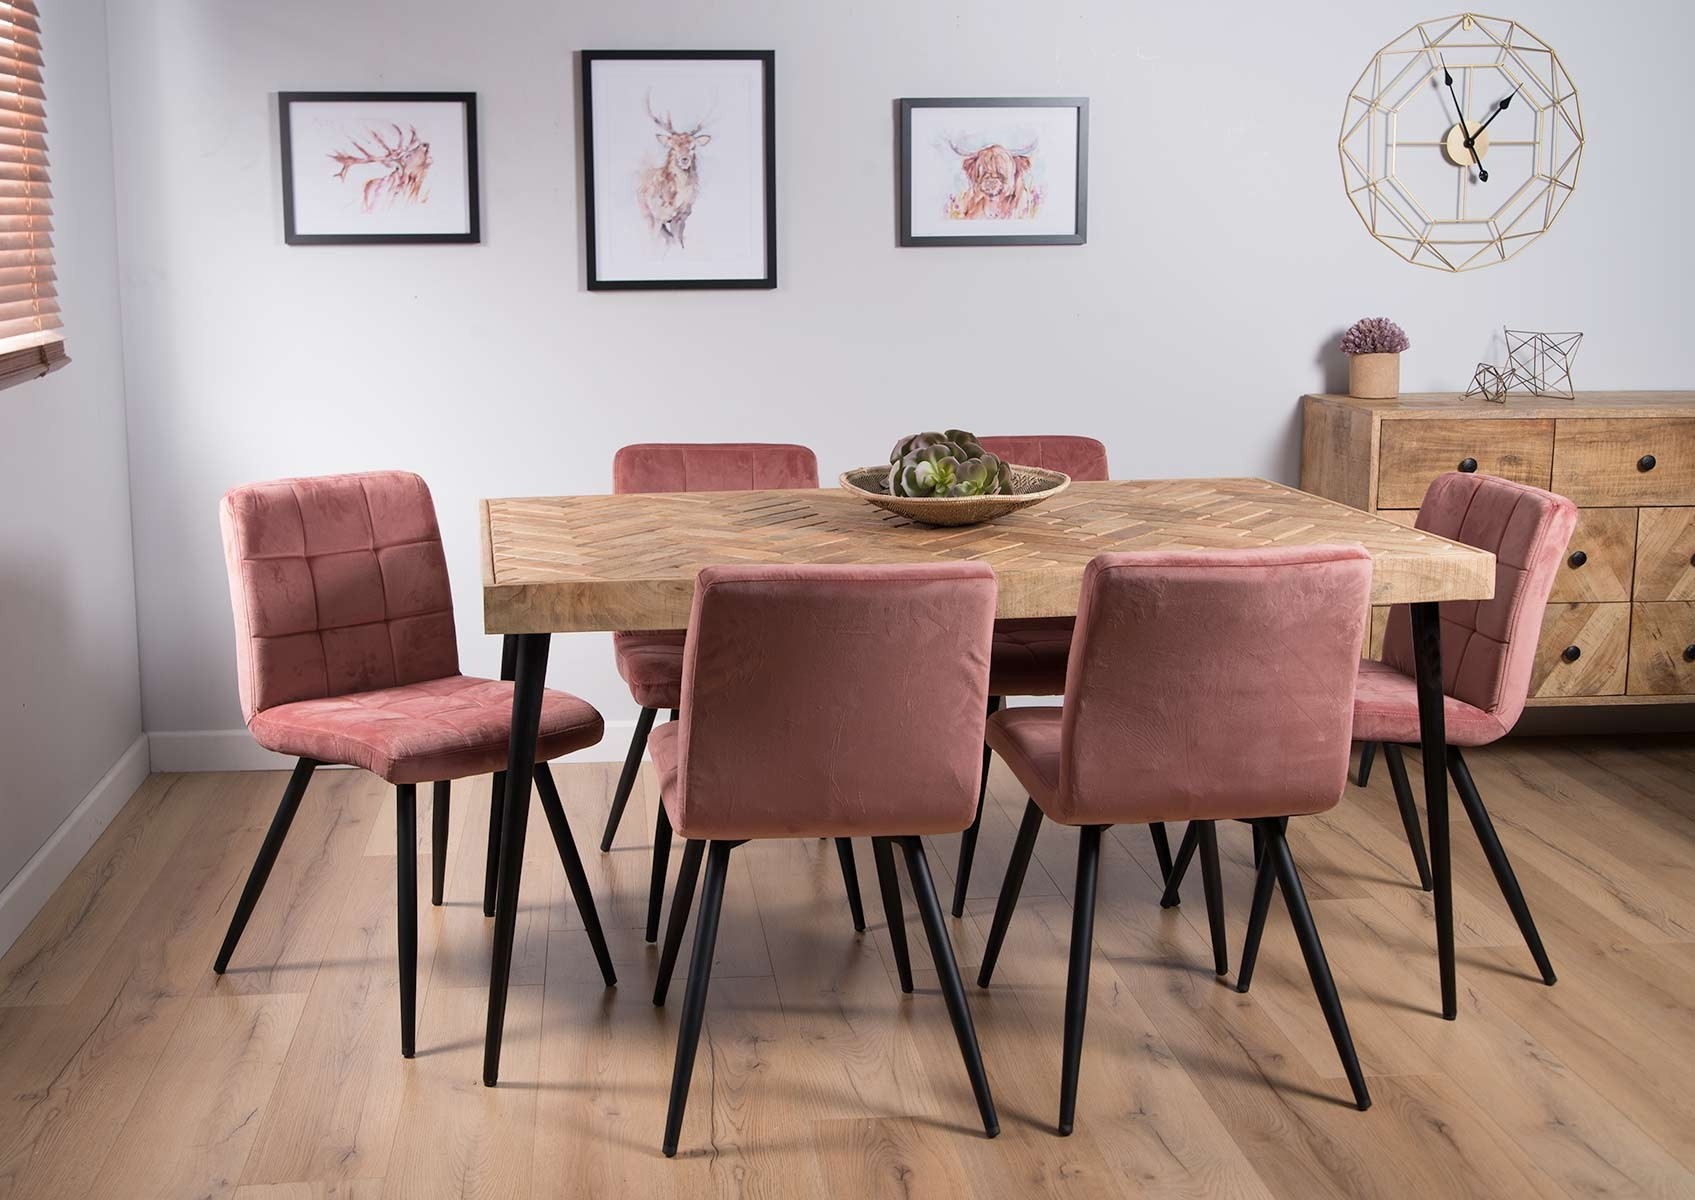 Mango 6 Seater Dining Set, Light Pink Dining Room Chairs